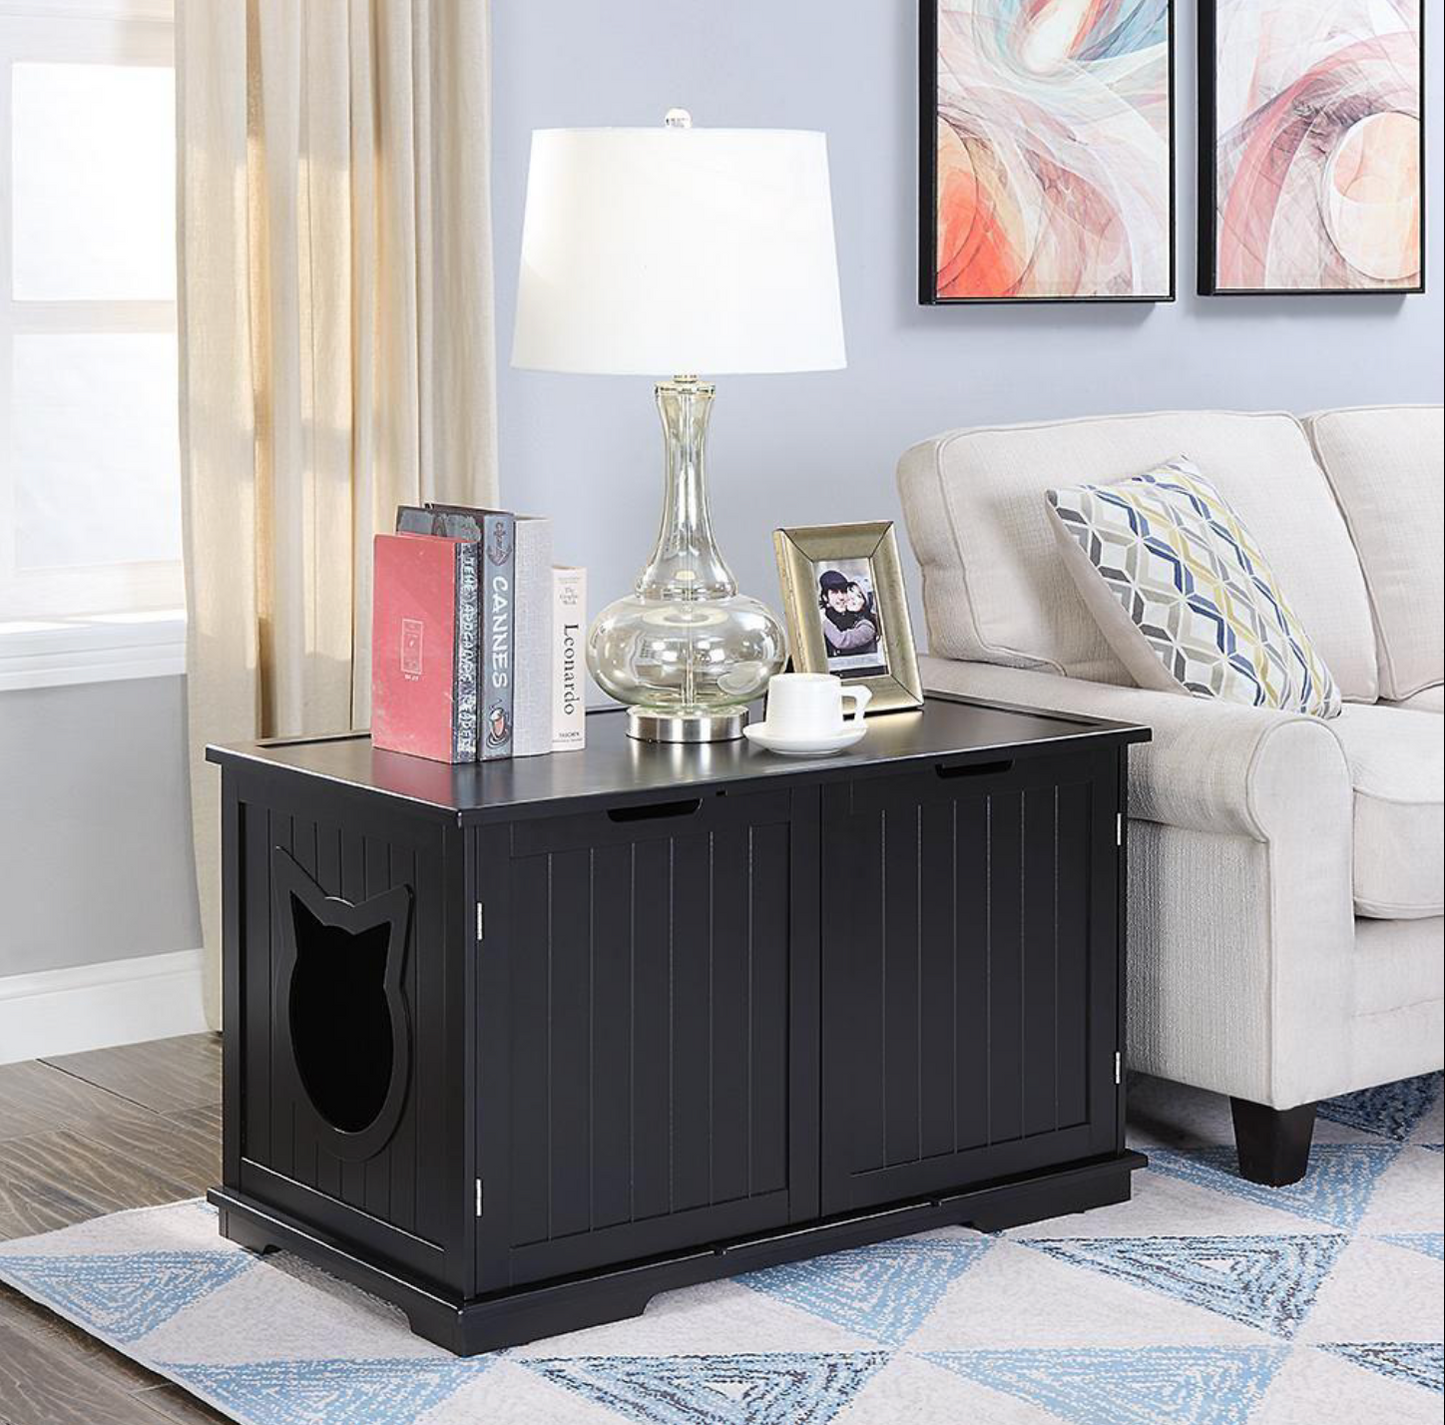 X-Large Cat Multi-Functional End Table - White or Black - Madison's Mutt Mall